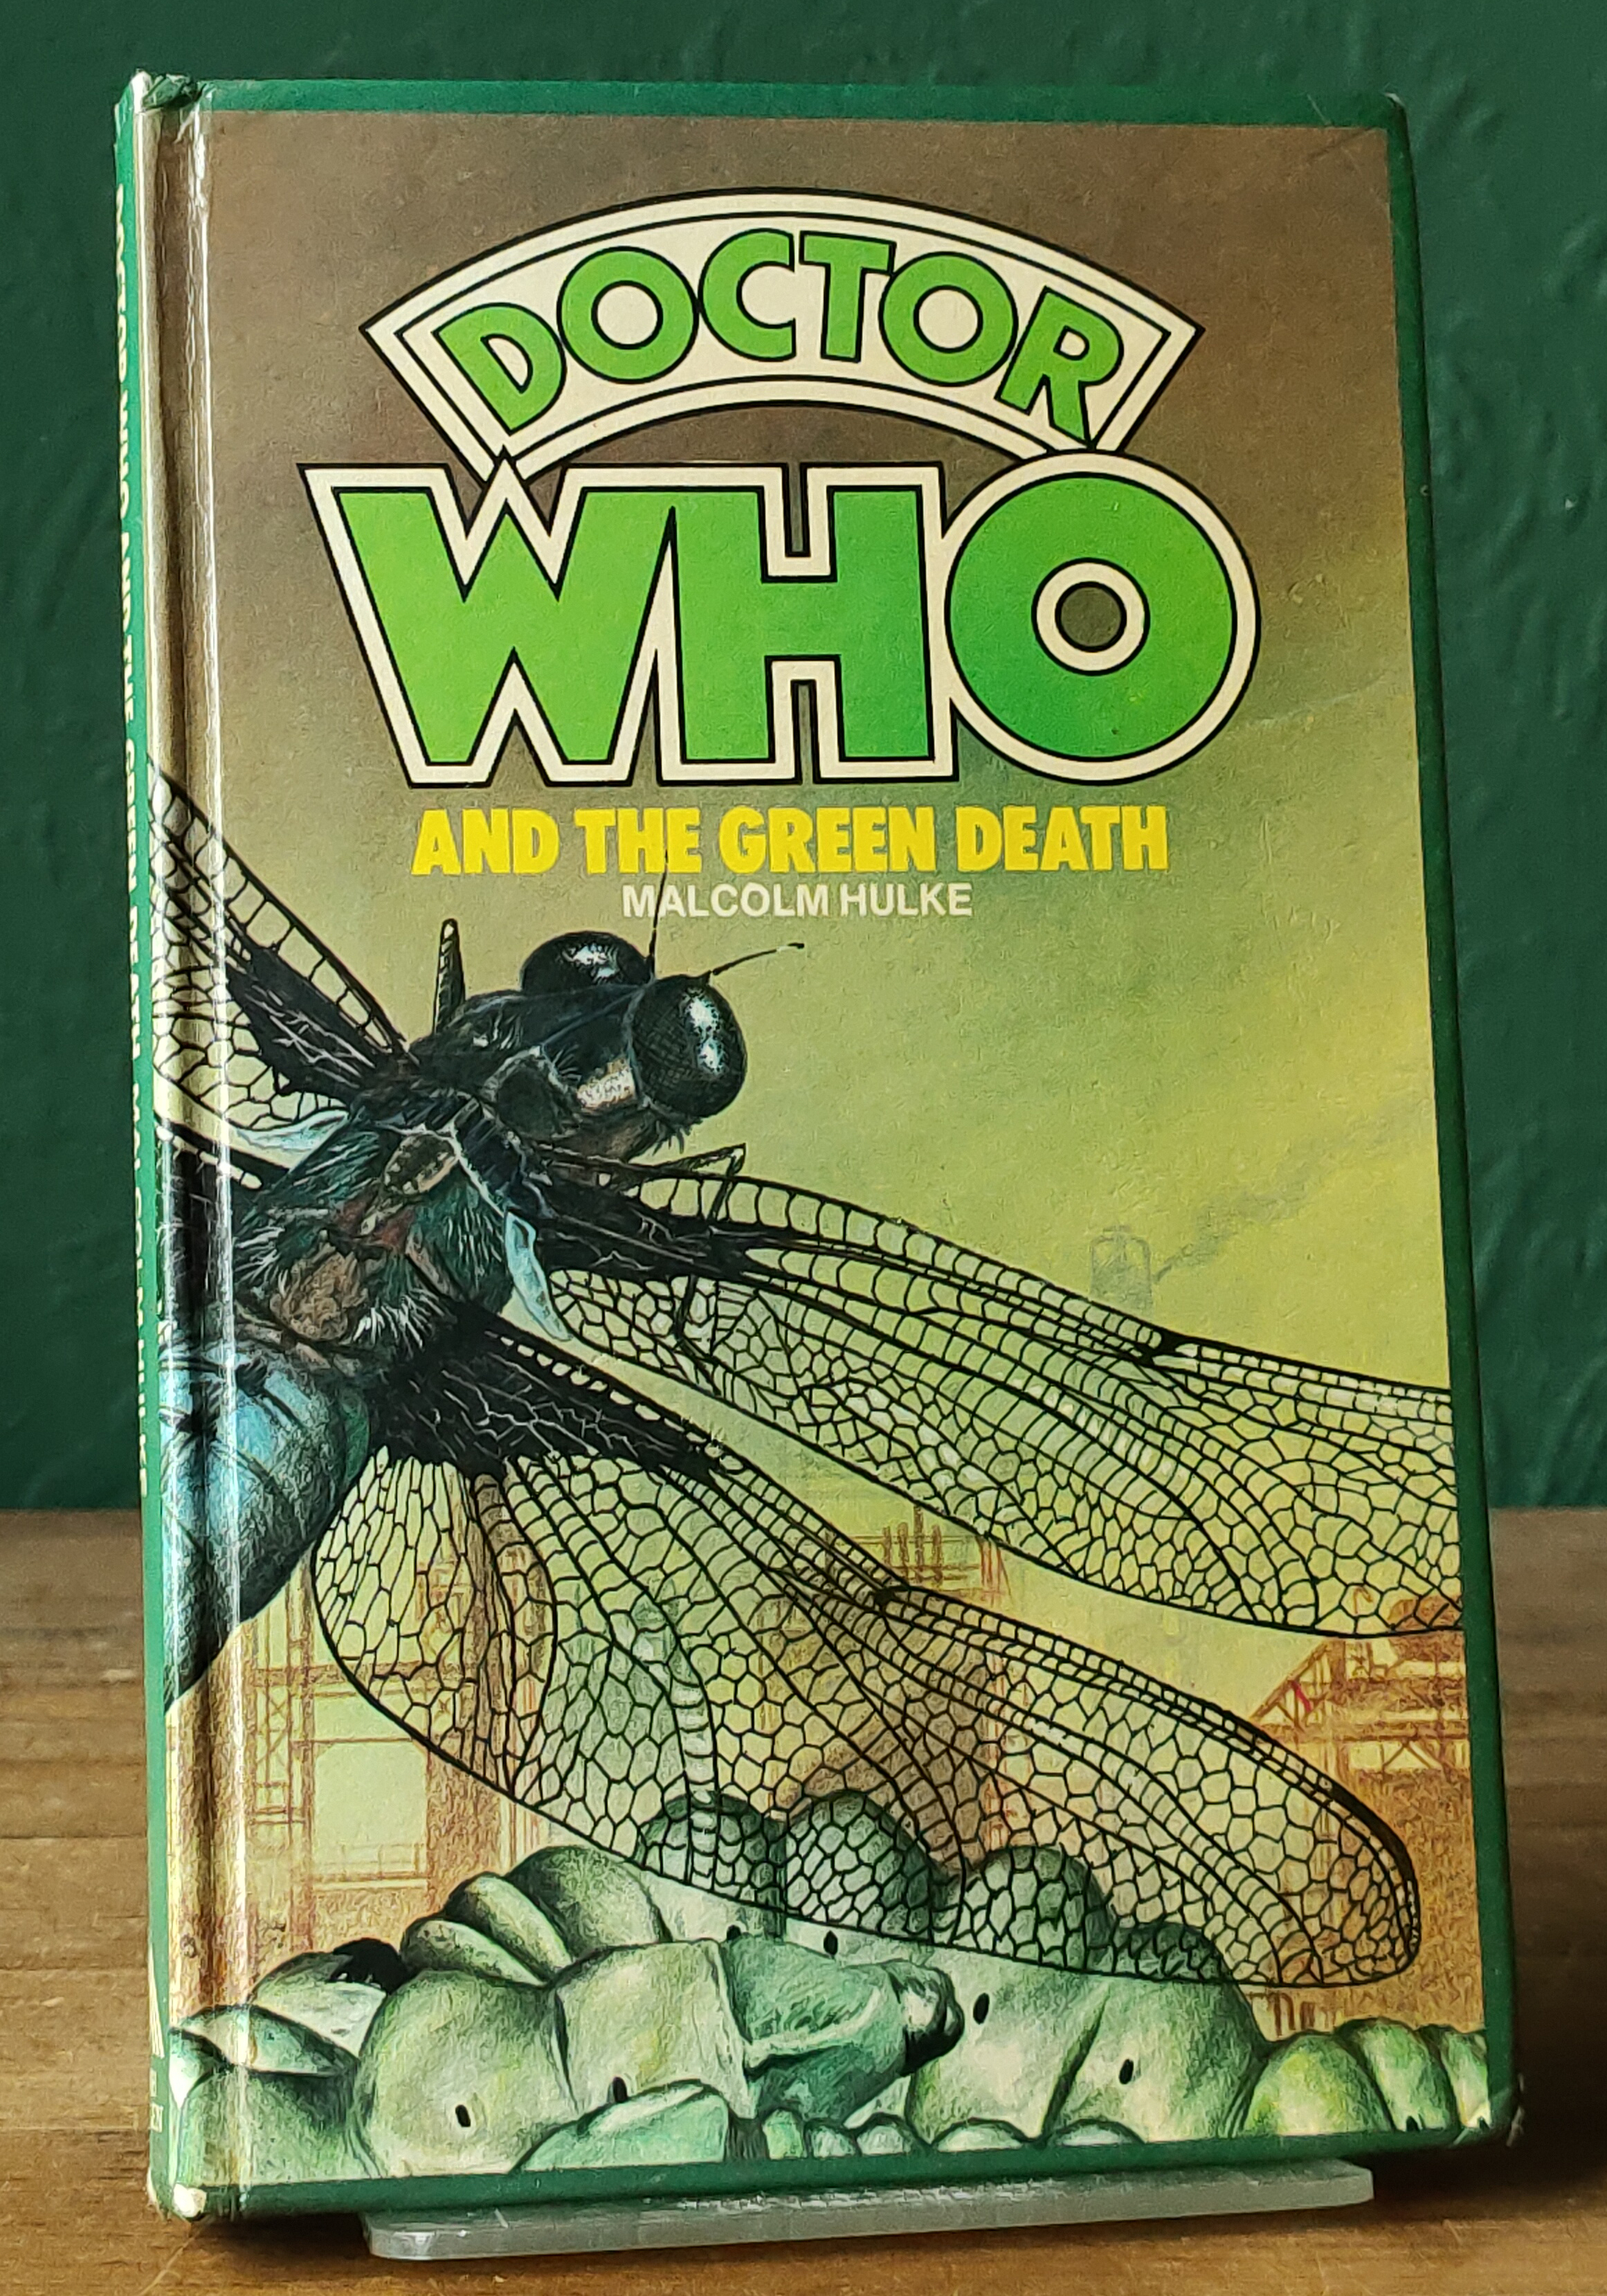 Doctor Who and the Green Death UK HB XL